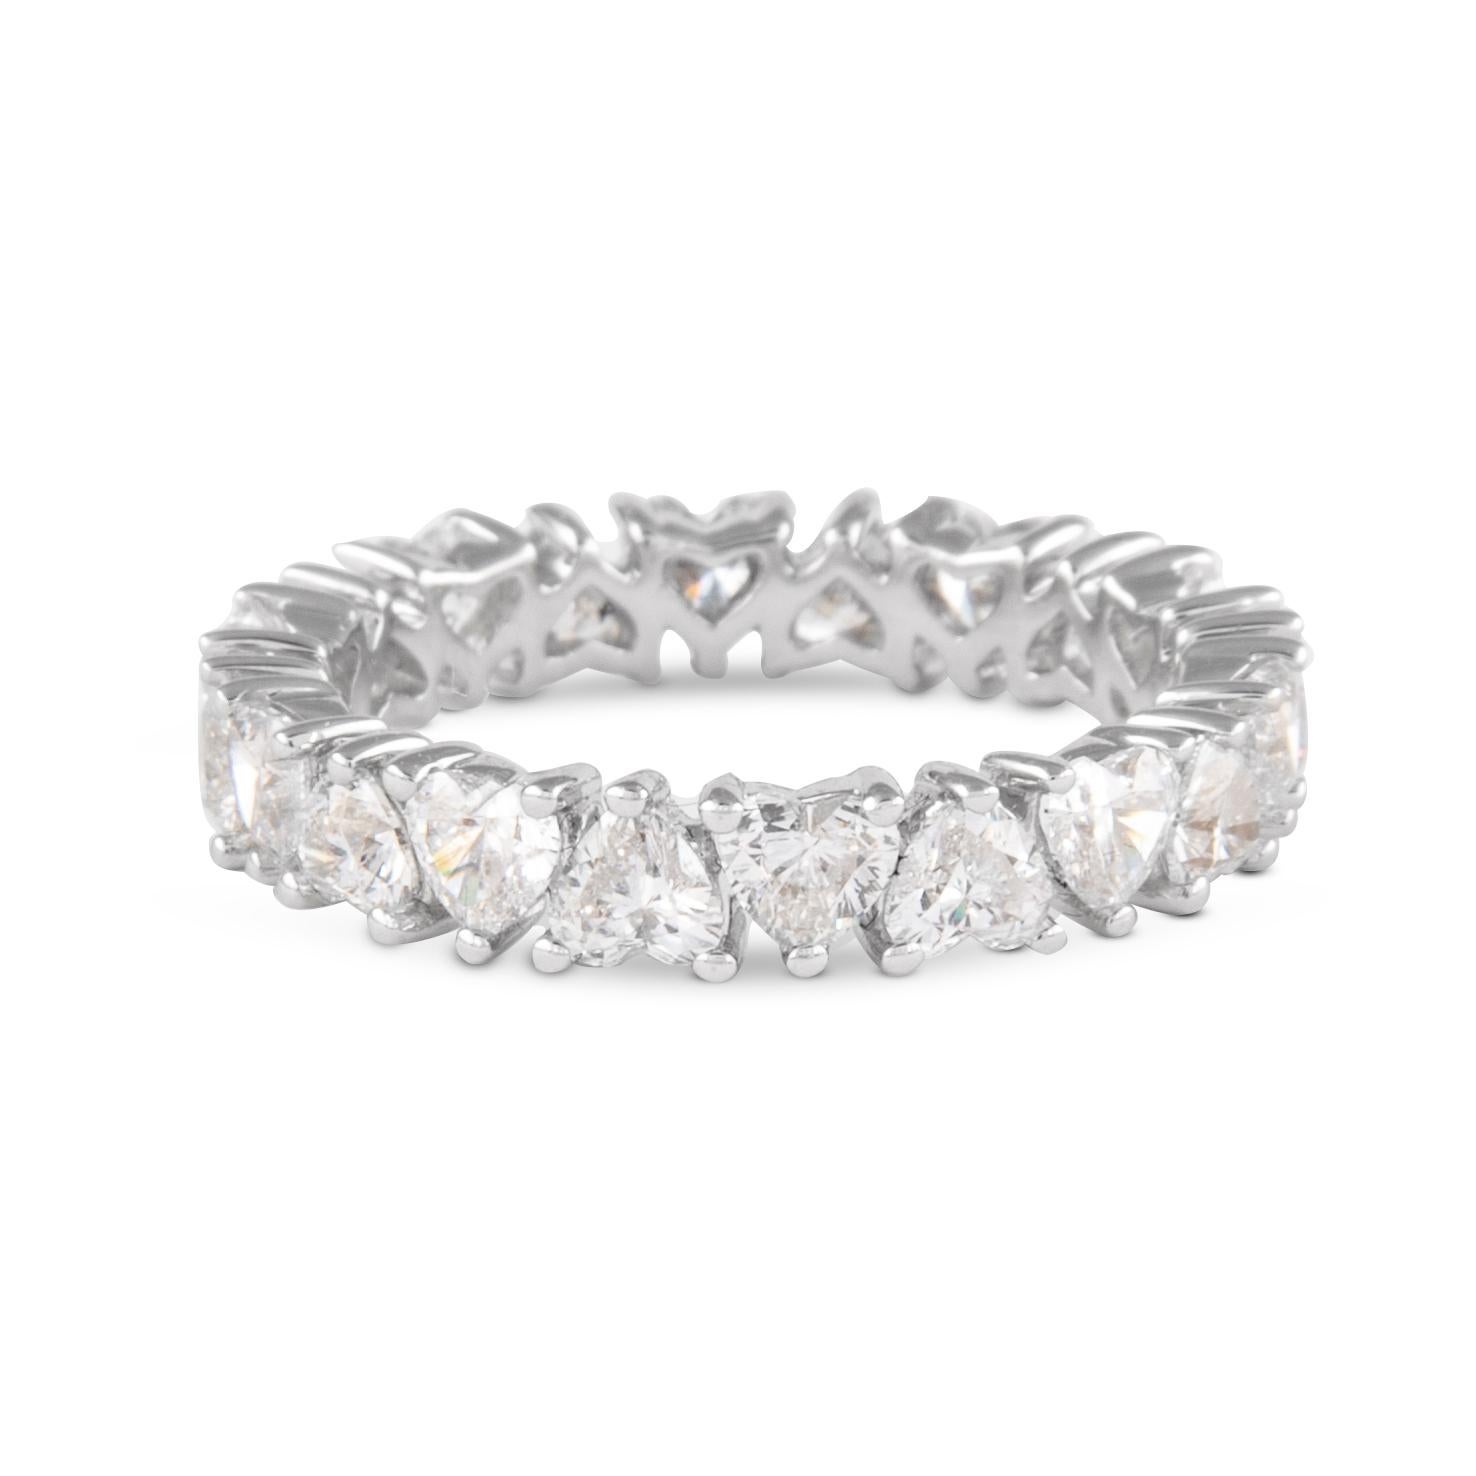 Stunning heart shape diamond eternity band, alternating, By Alexander Beverly Hills.
20 heart brilliant diamonds, 2.82 carats. D-F color and VVS clarity. Set in 18k white gold, 2.96 grams, size 6.75. 
Accommodated with an up to date appraisal by a